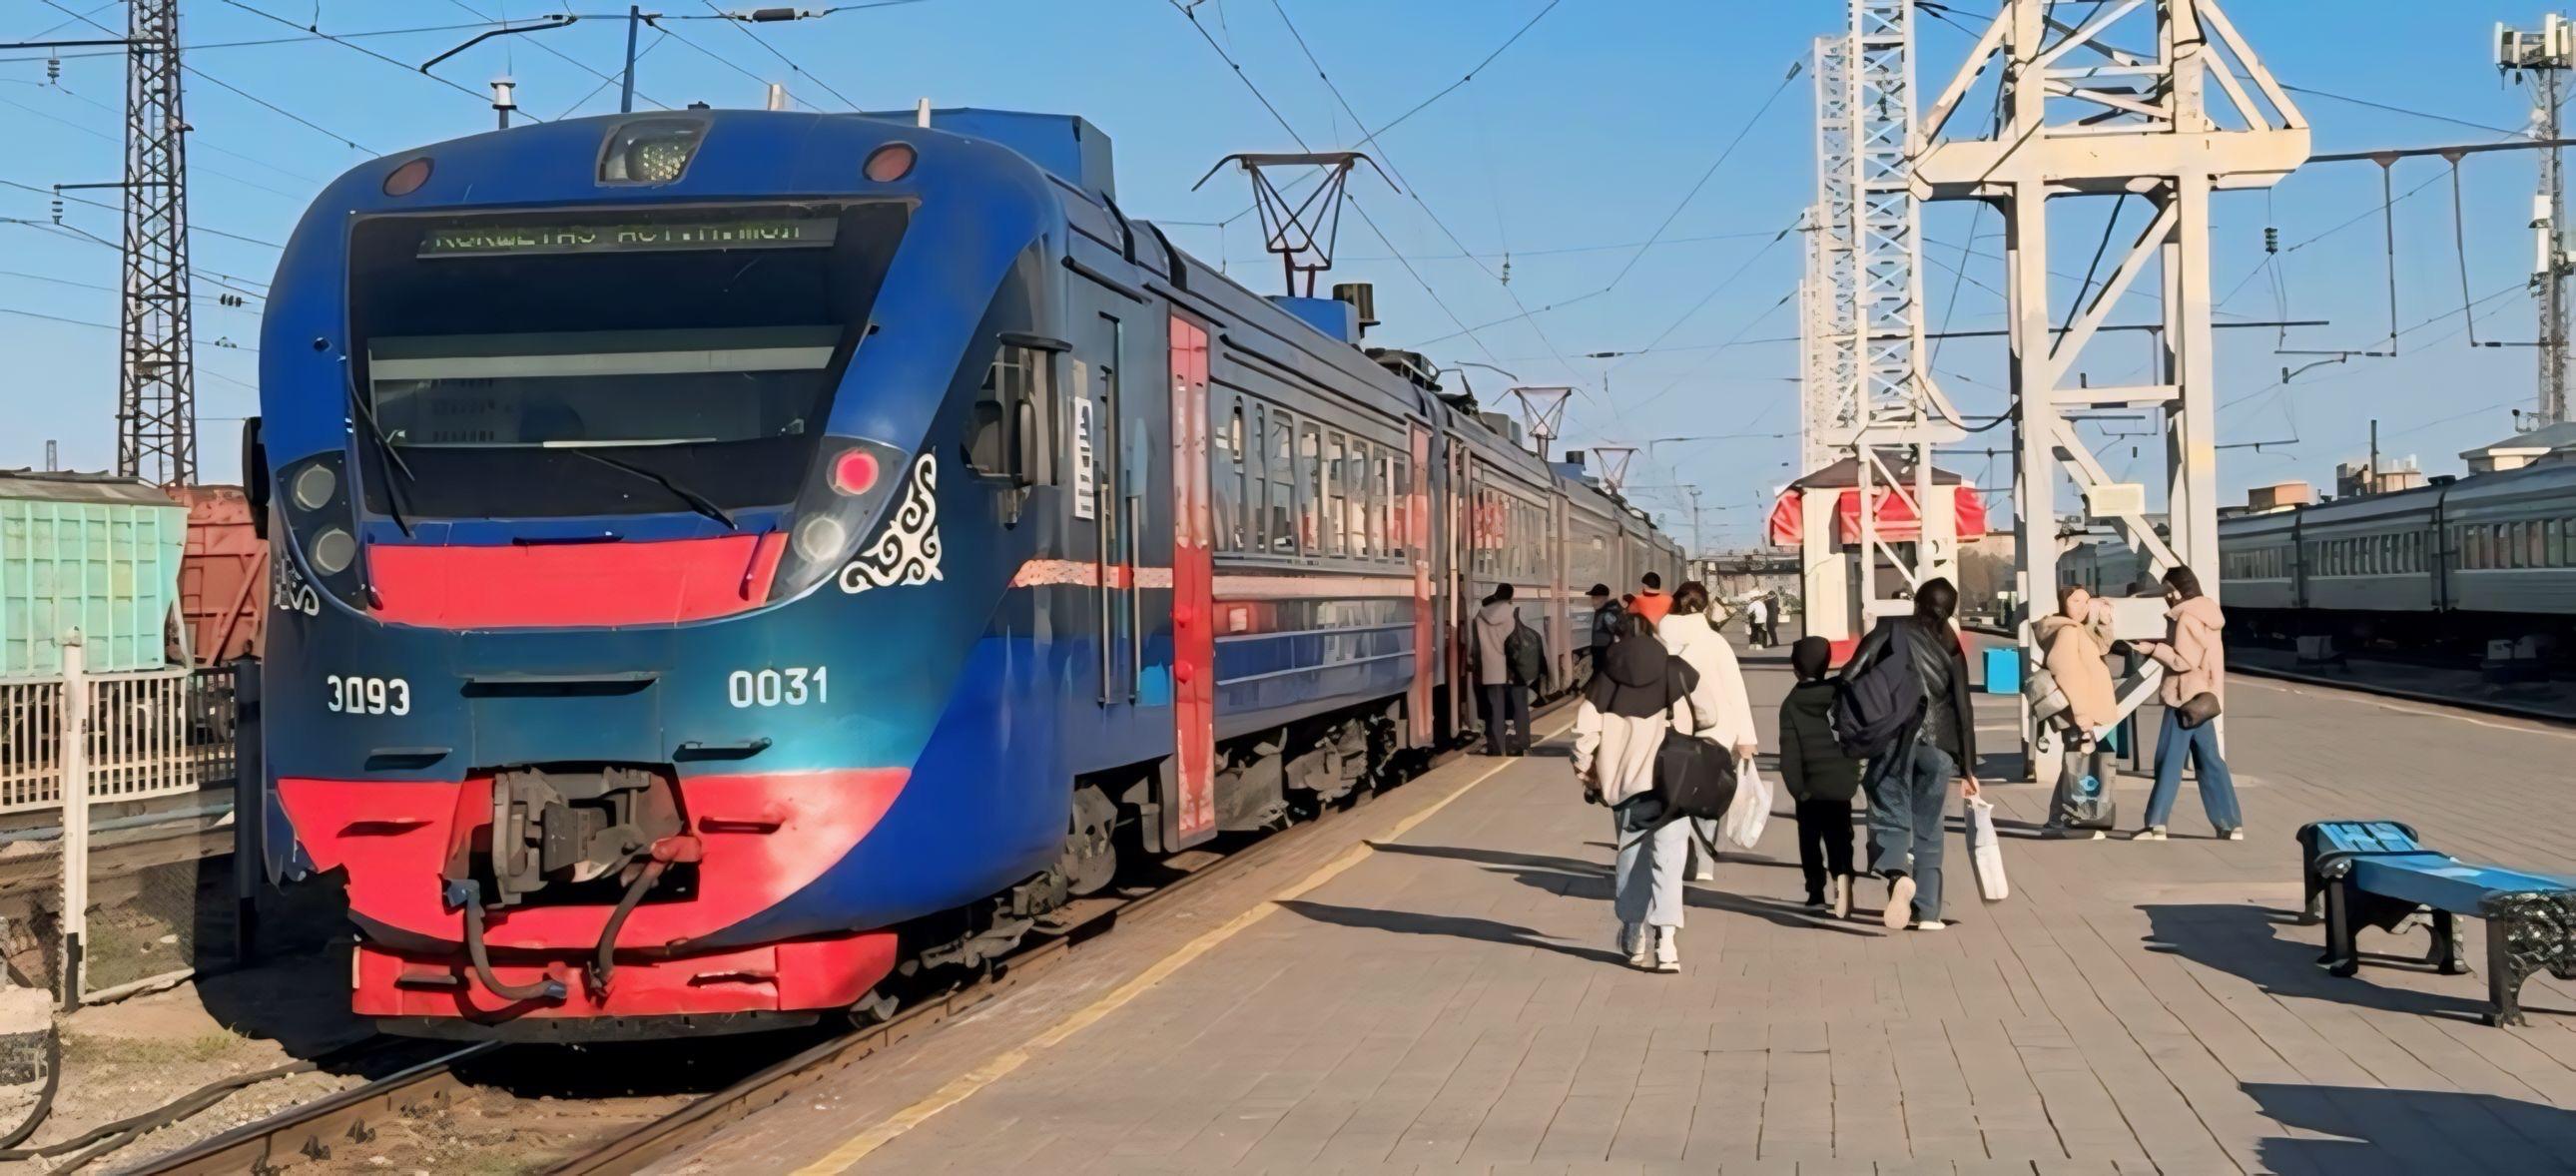 Passengers can get from the capital to Kurort-Borovoye by electric train in 2.5 hours